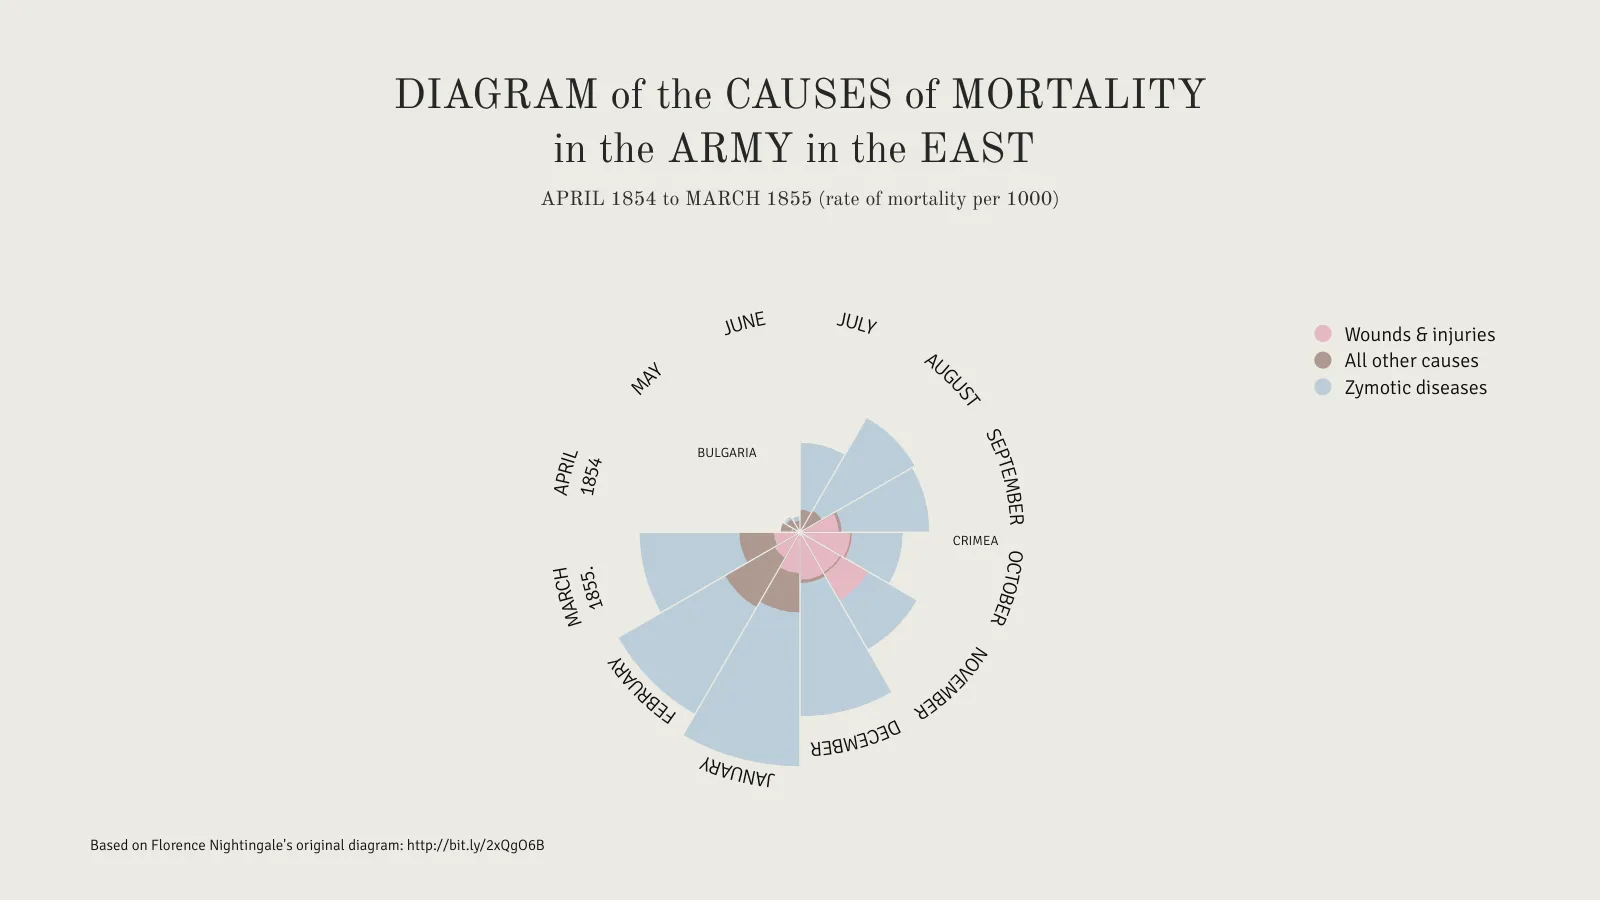 Nightingale's Rose Chart example: DIAGRAM of the CAUSES of MORTALITY
in the ARMY in the EAST